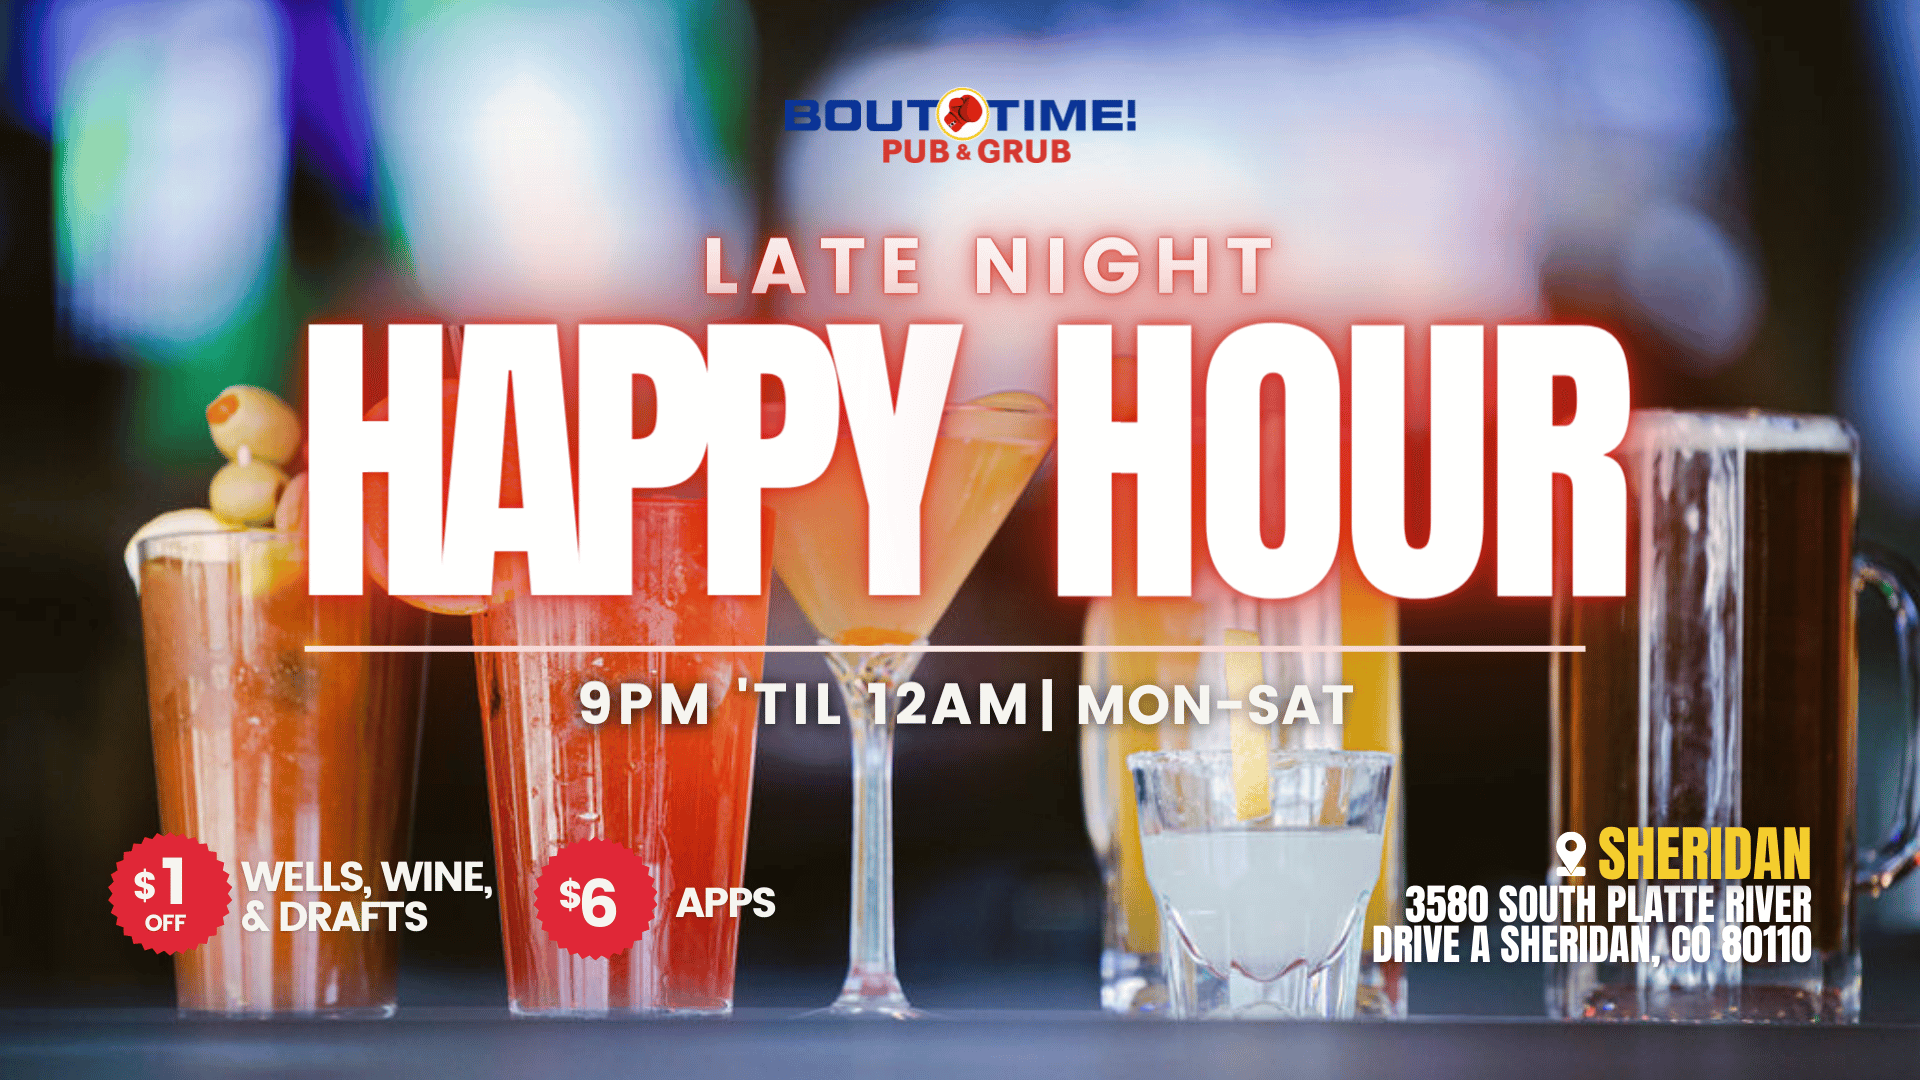 Bout Time Pub & Grub branded infographic. Text reads: Late Night Happy Hour 9PM 'Til 12AM, Mon-Sat. $1 off Wells, wine, & drafts. $6 apps. Sheridan, 3580 South Platte River Drive A Sheridan, CO 80110.